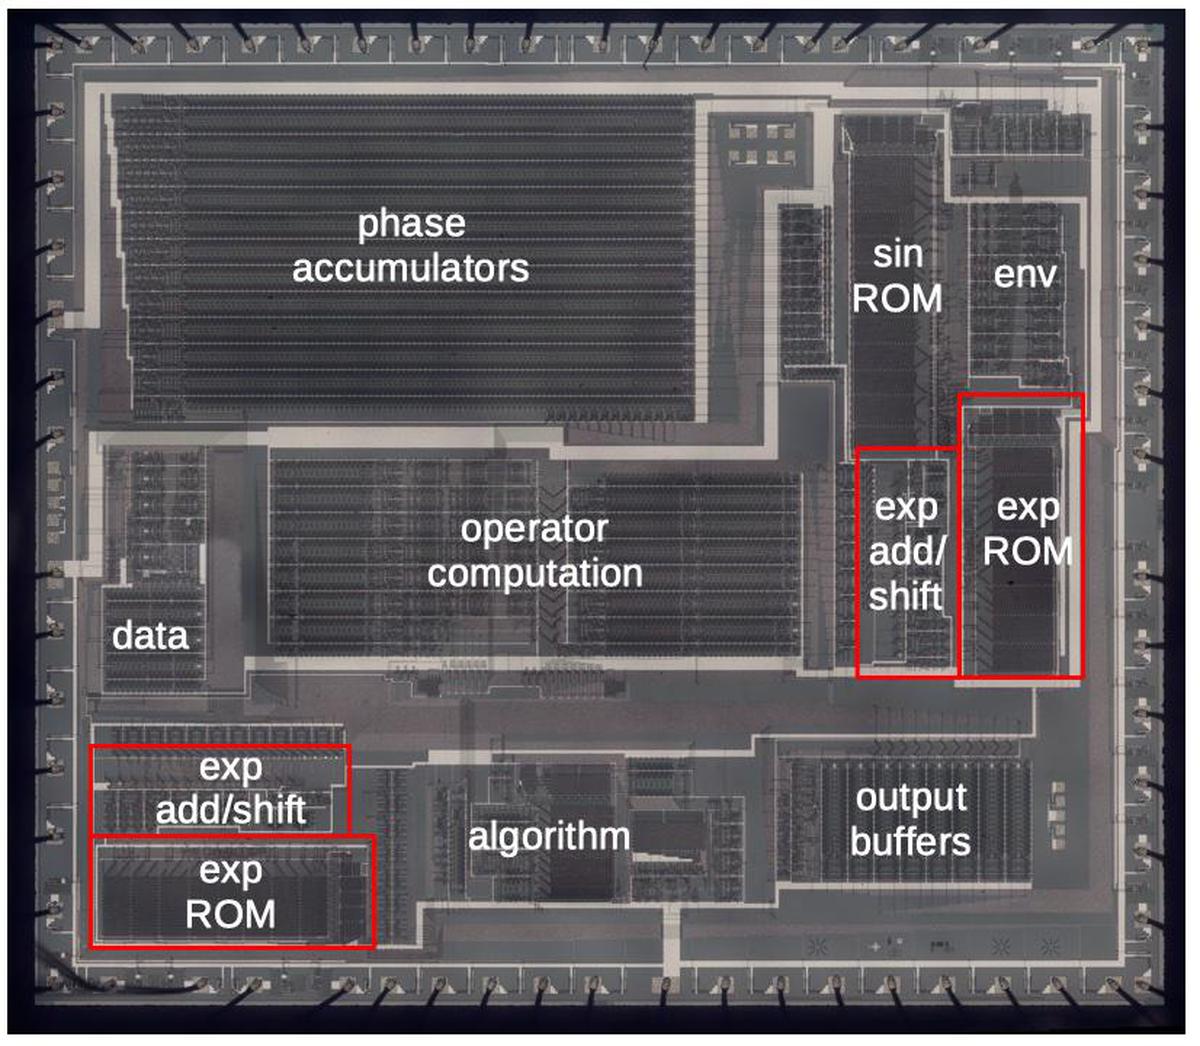 Die with the major functional blocks labeled. This photo shows the metal layer of the chip. (Click for a larger version.)